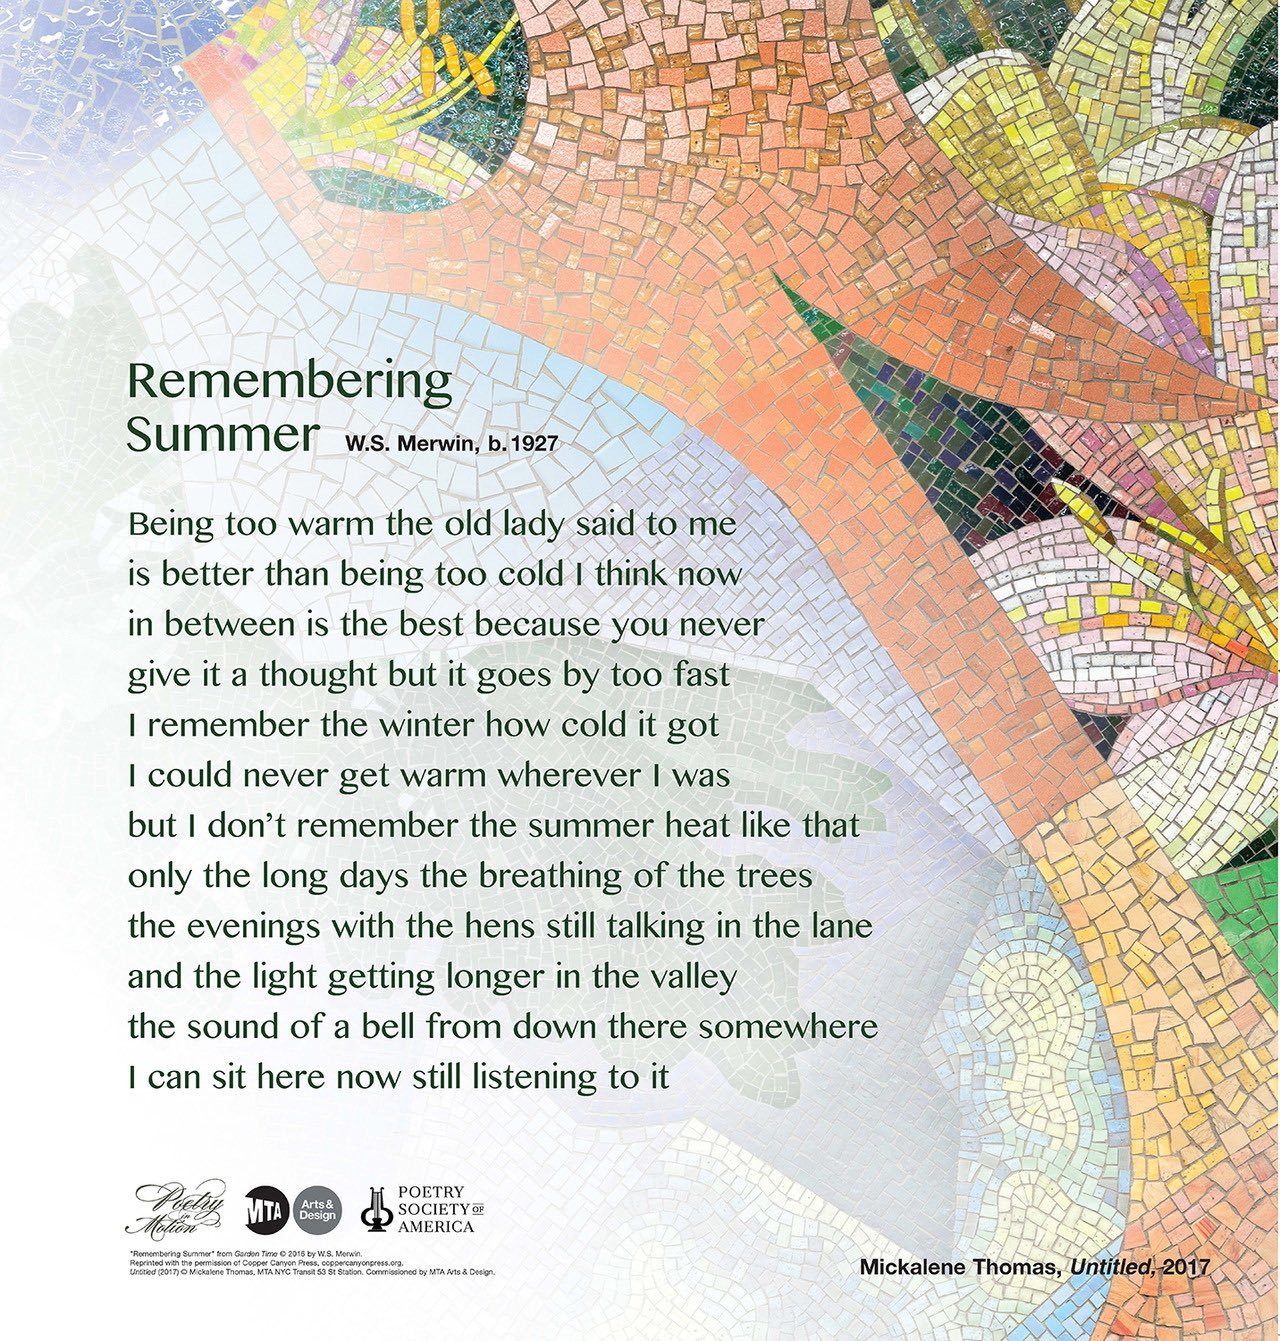 A poster featuring art by Mickalene Thomas depicts a colorful mosaic with a flower blooming in the right corner. Superimposed on the art is a poem in dark green text titled Remembering Summer, written by W.S. Merwin.